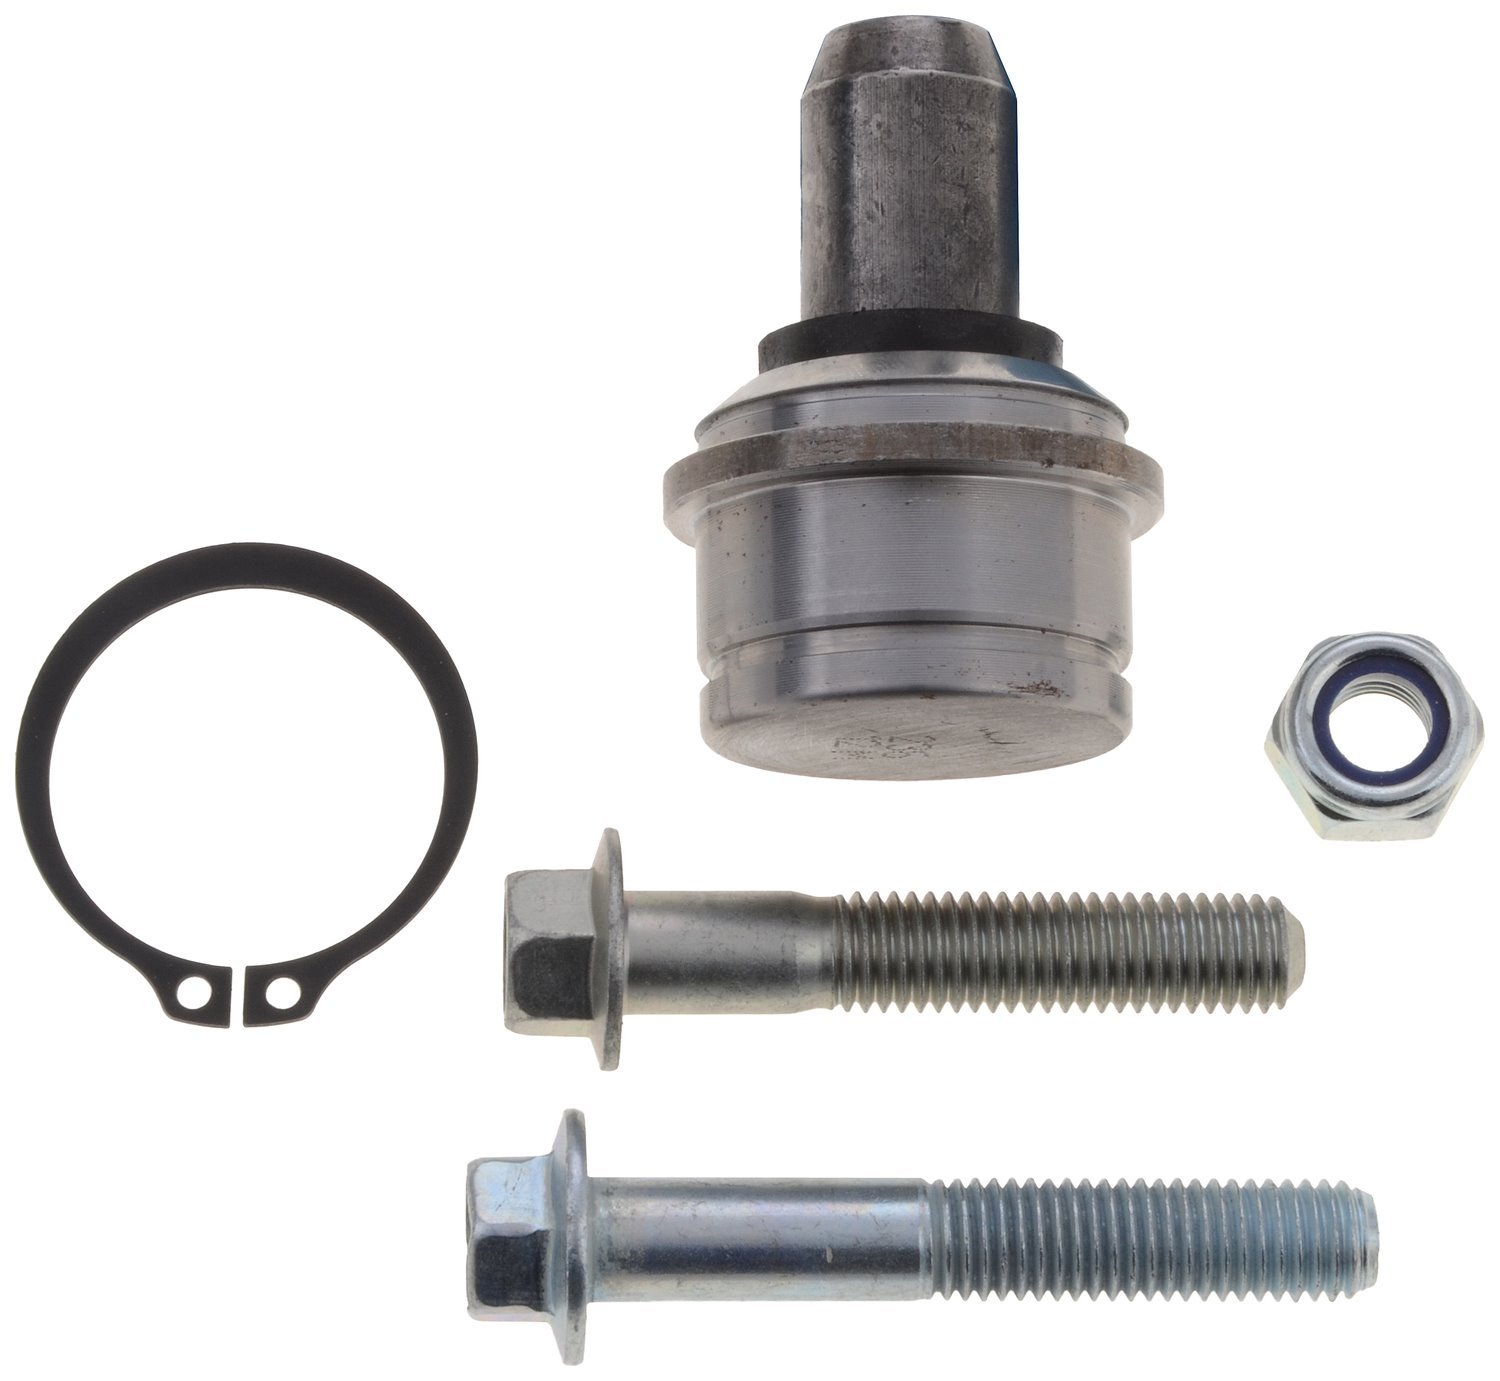 JBJ7025 Ball Joint Fits Select Ford Models, Position: Left/Driver or Right/Passenger, Front Upper